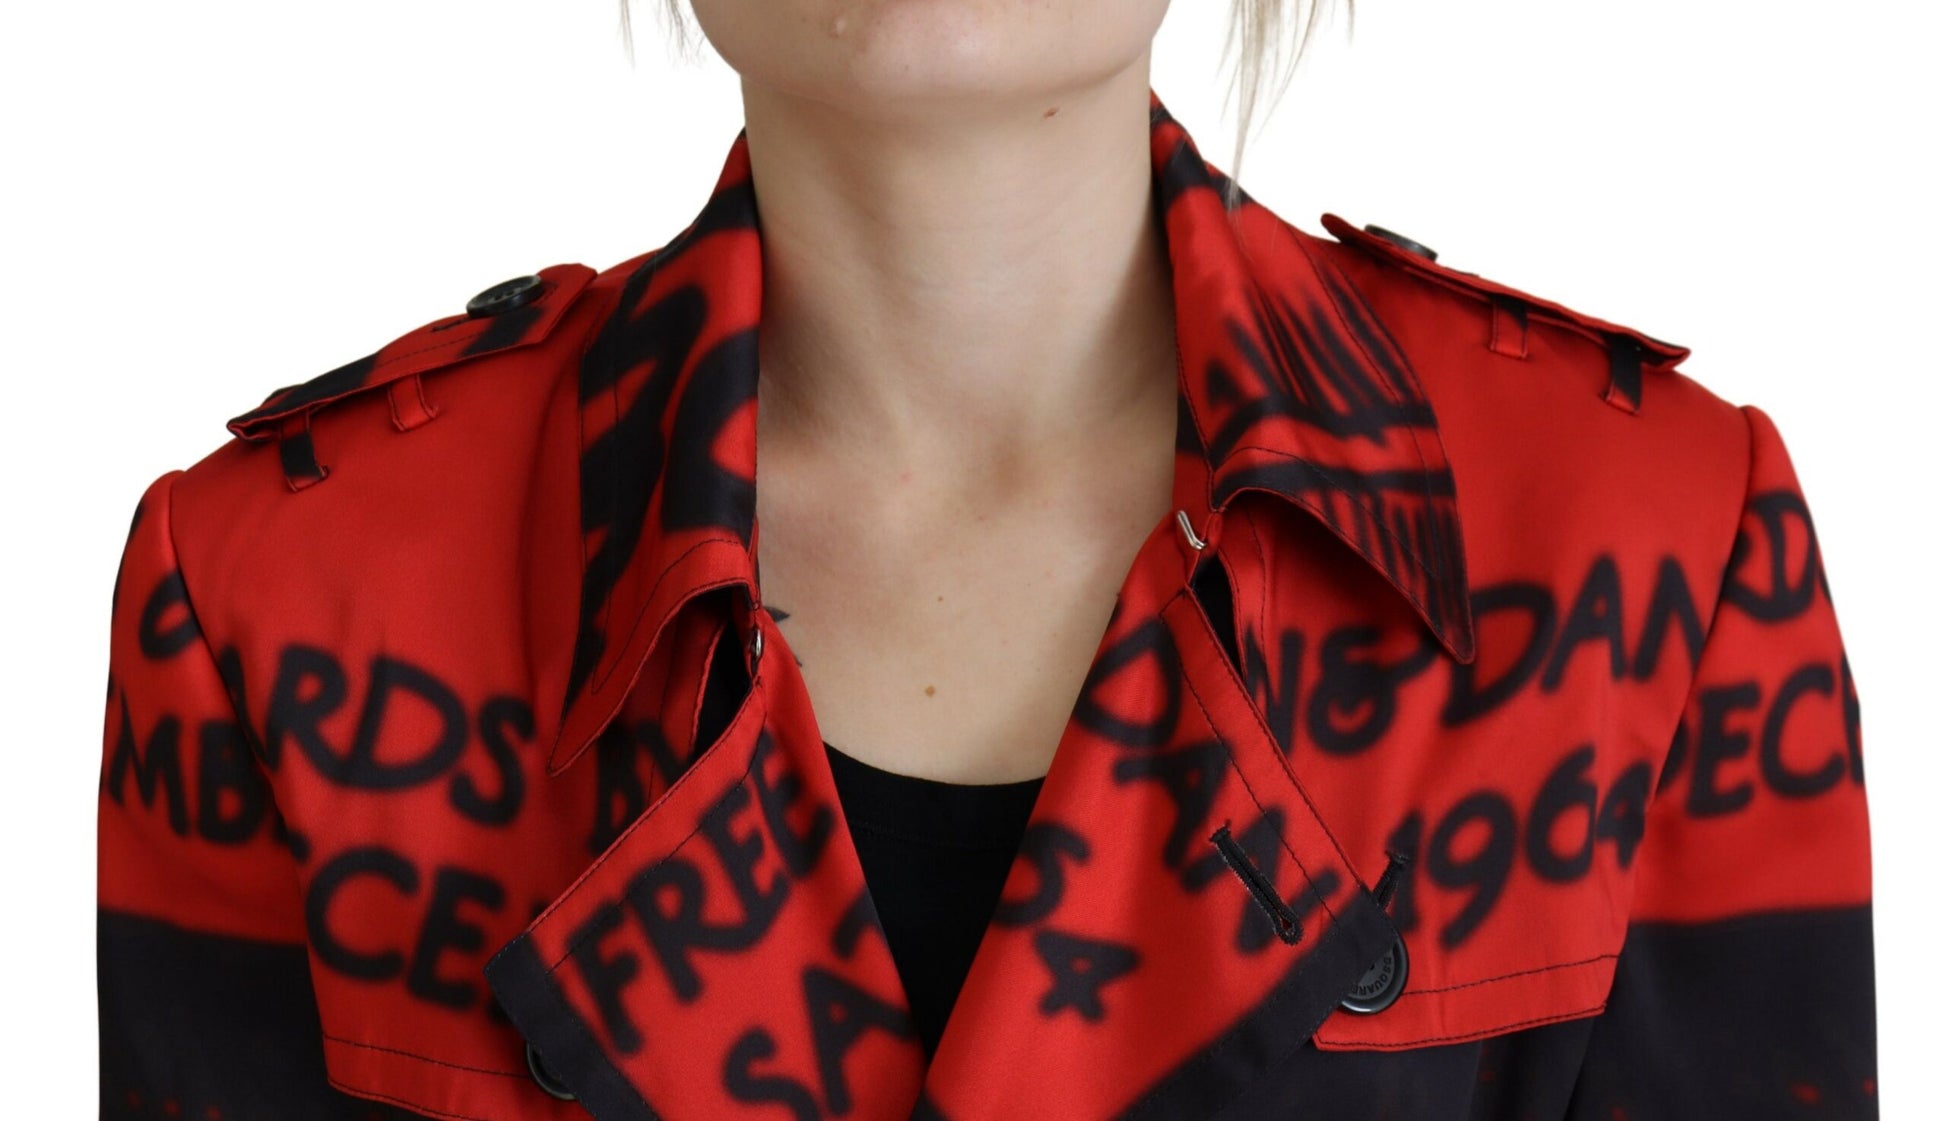 Red Printed Button Collared Desigual Coat Jacket